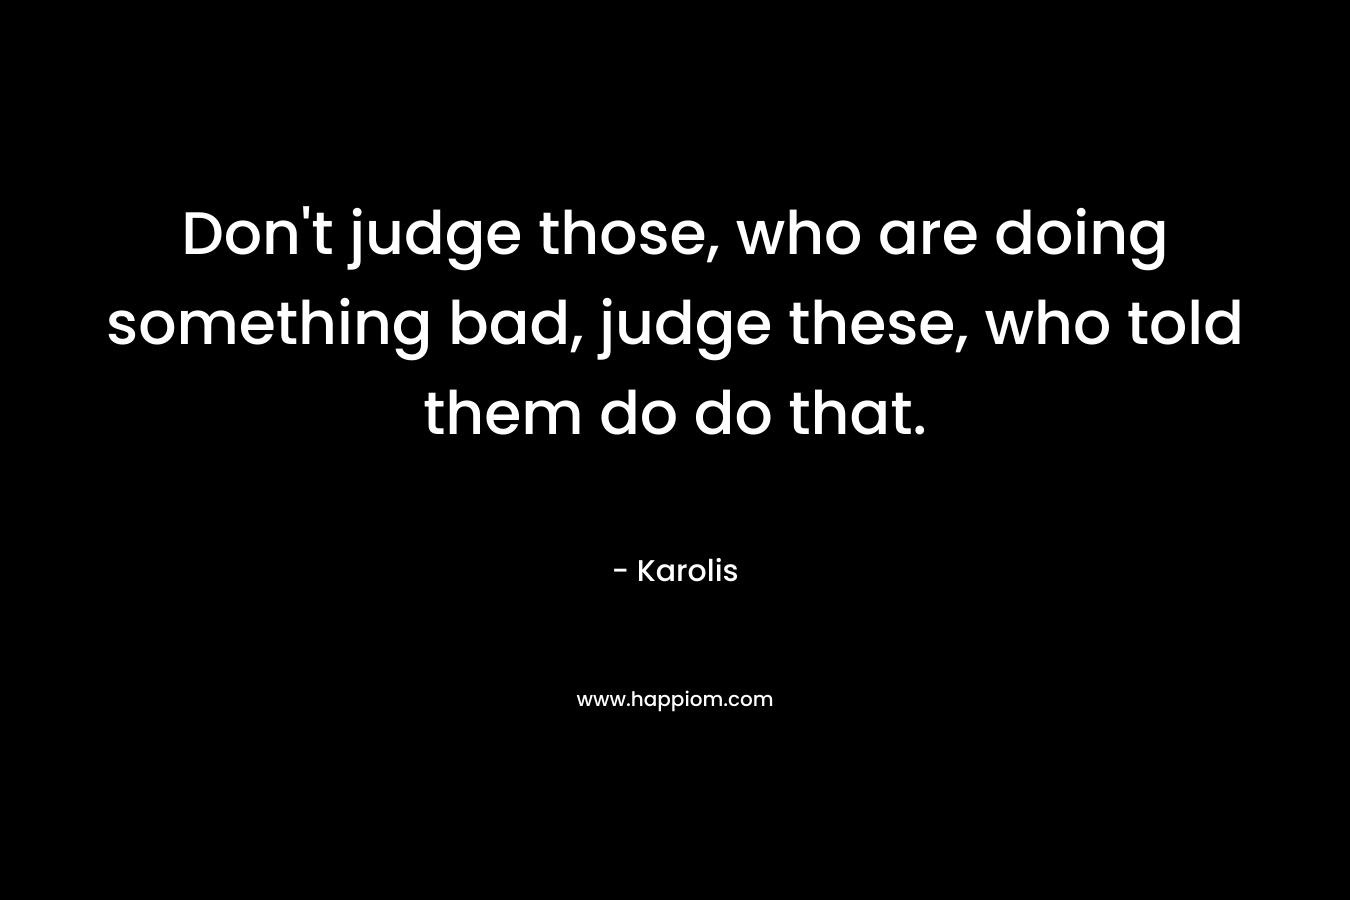 Don’t judge those, who are doing something bad, judge these, who told them do do that. – Karolis